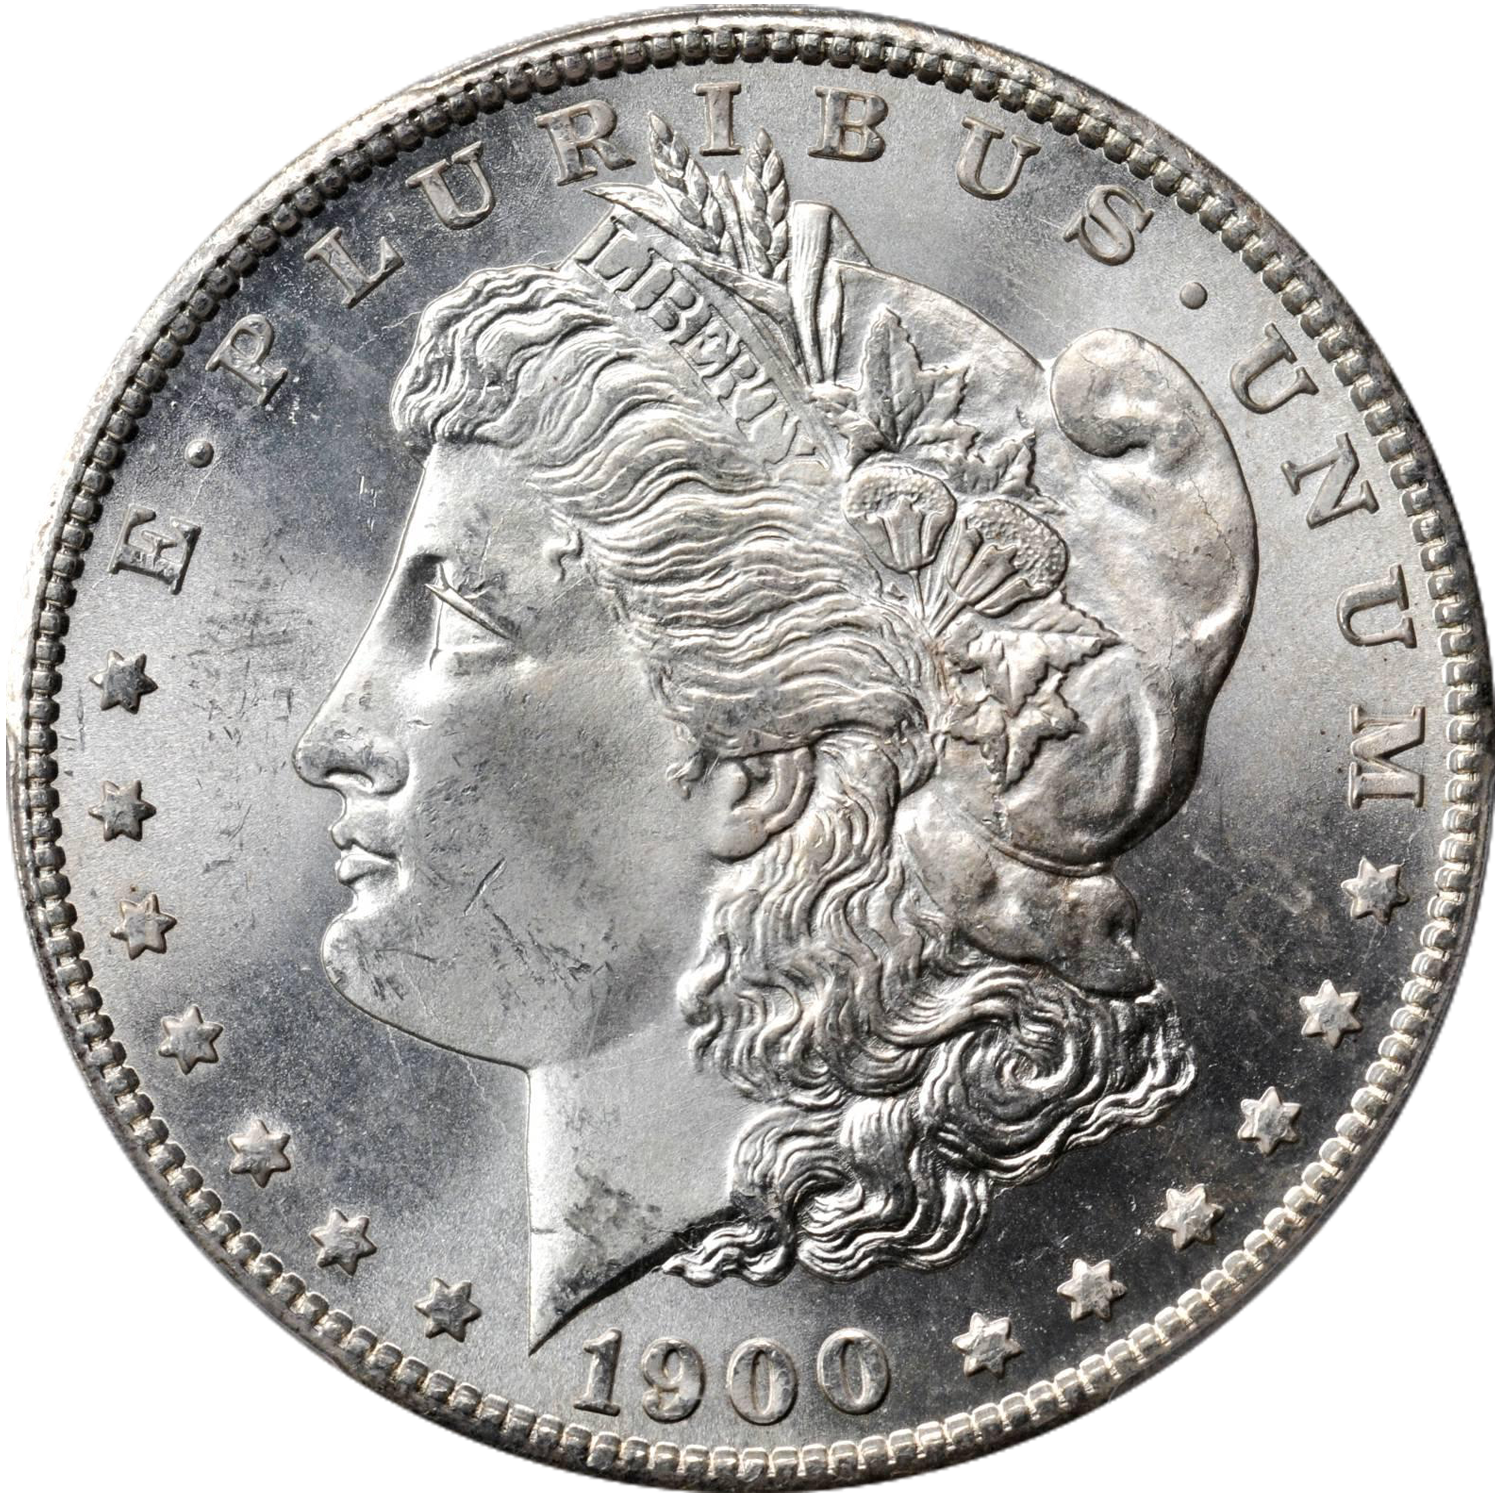 1900 s mint morgan dollar price guide value